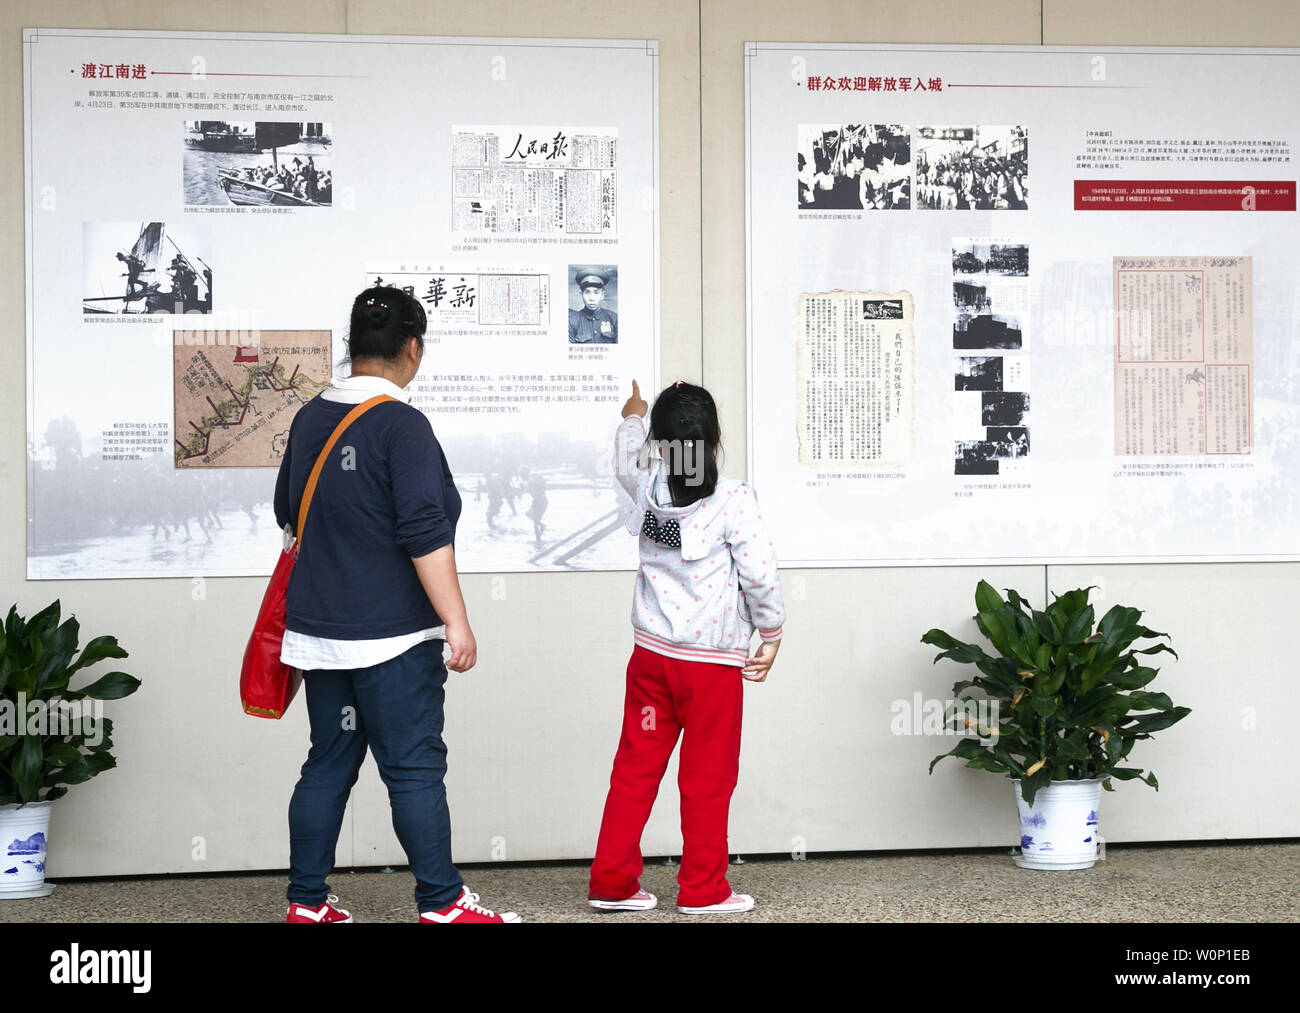 On April 23, 2019, Nanjing, under the guidance of the Propaganda Department of the Nanjing Municipal Committee of the Communist Party of China and sponsored by the Nanjing Veterans Affairs Bureau and the Nanjing Yuhuatai Martyrs Cemetery, celebrated the 70th anniversary of the liberation of Nanjing ----The oral historical facts exhibition of some veterans participating in the liberation of Nanjing was held at the main peak tablet gallery of the Yuhuatai martyrs cemetery in Nanjing, attracting many visitors. Stock Photo